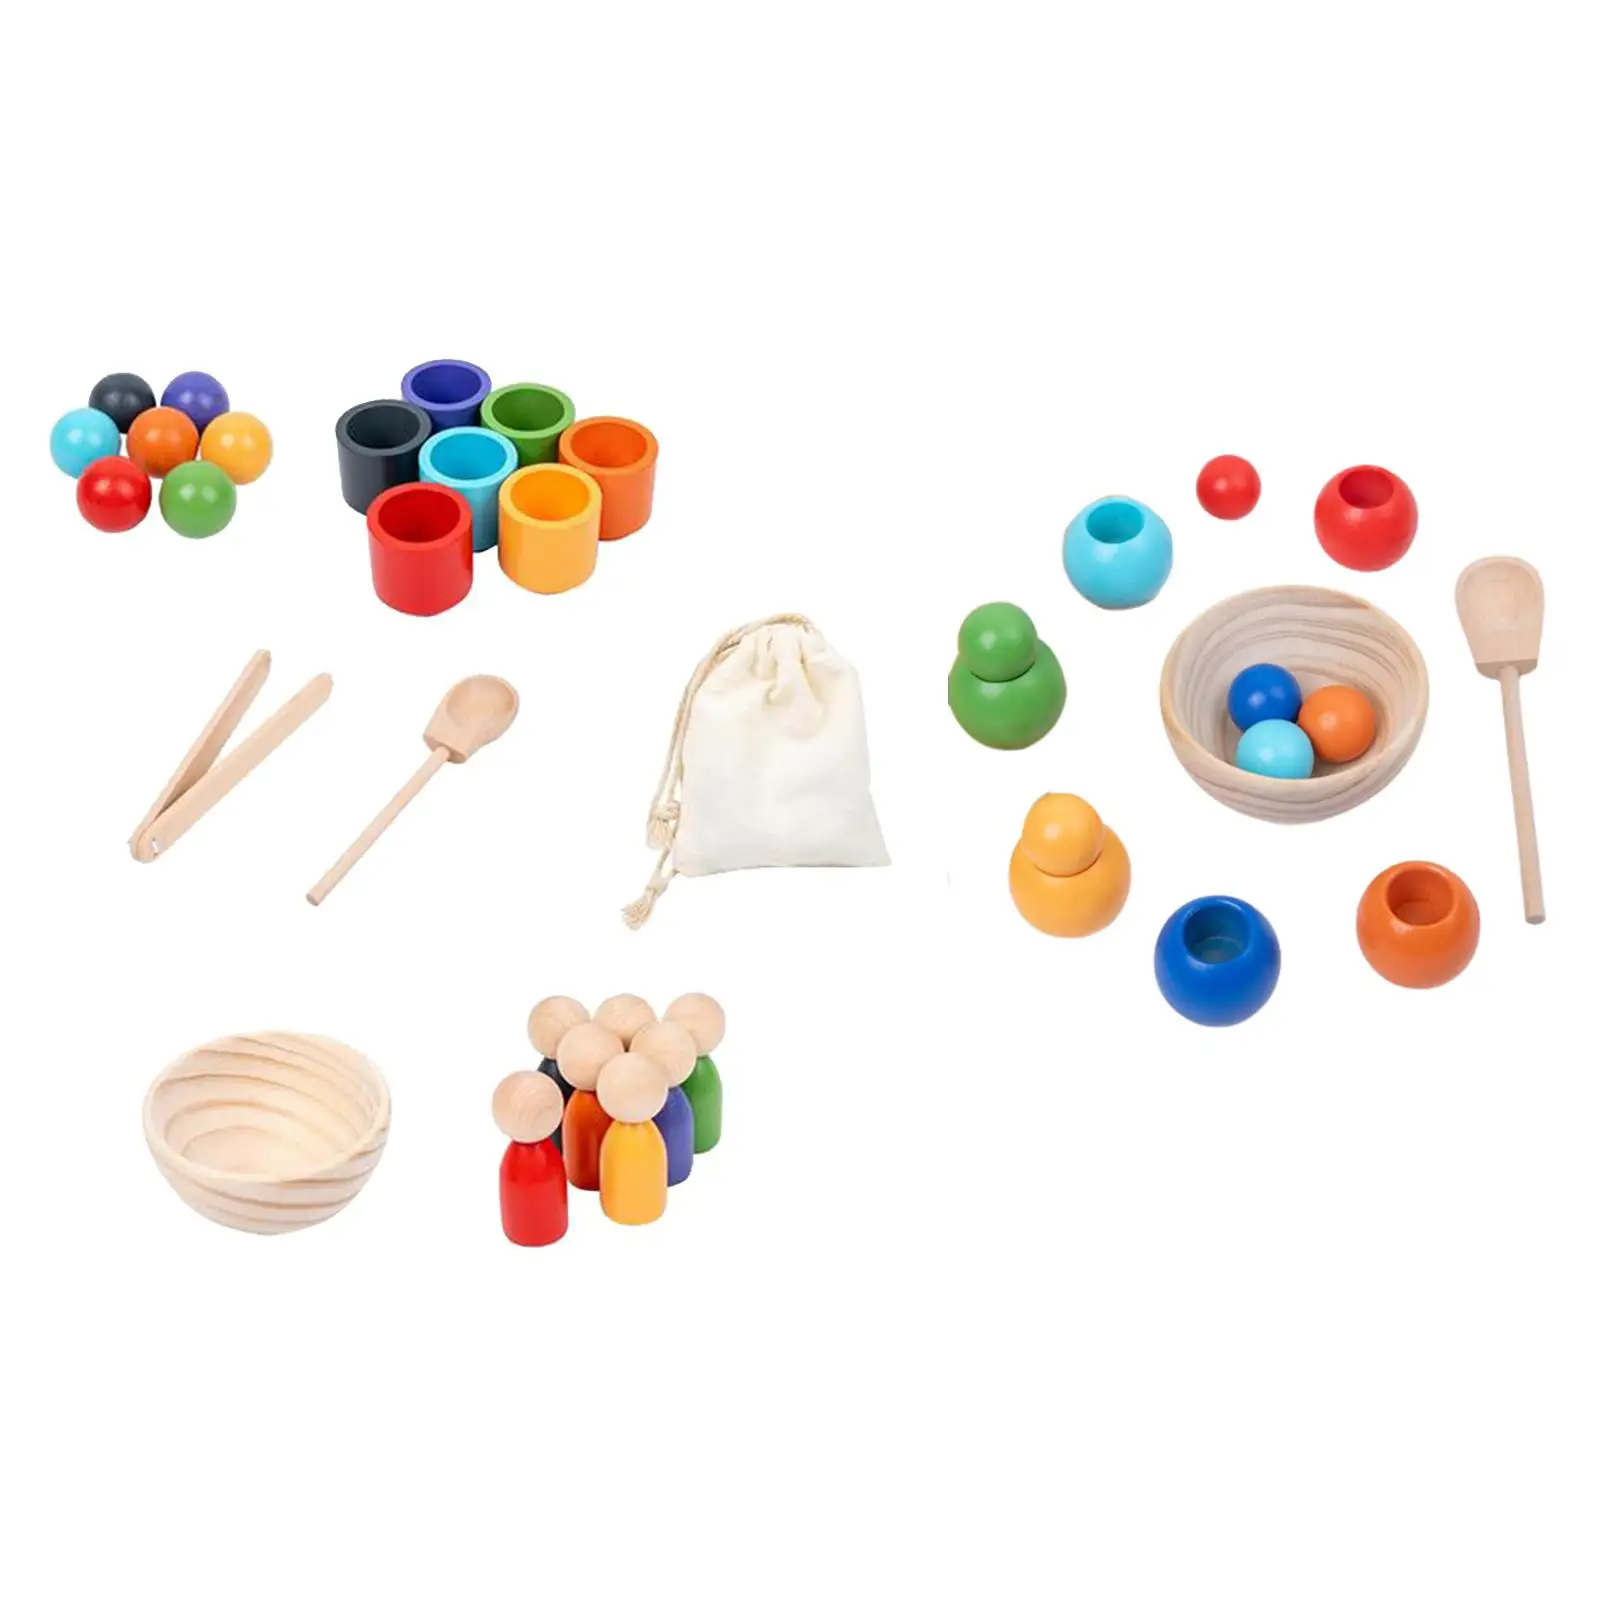 Balls in Cups Montessori Toy Fine Motor Board Game Matching and Counting Toy